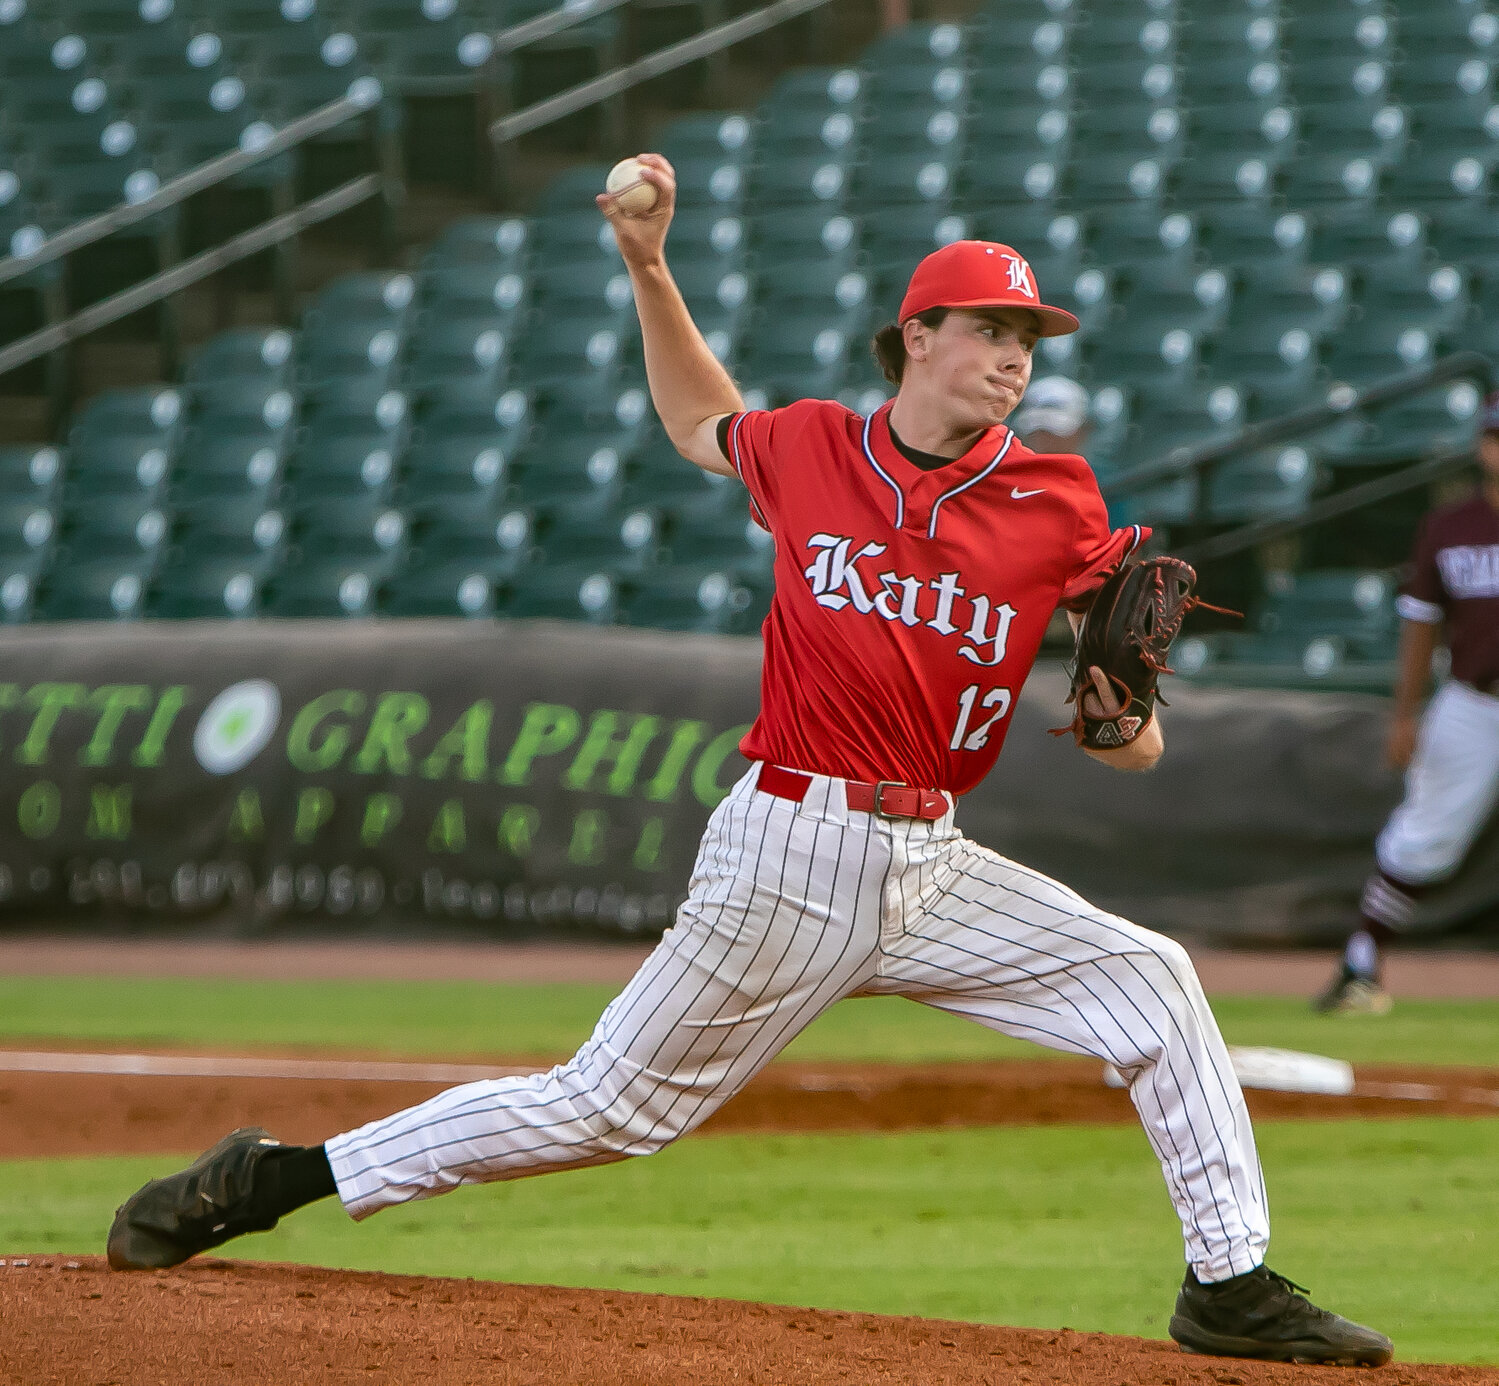 Lucas Moore pitches during Friday's Regional Final between Katy and Pearland at Constellation Field in Sugar Land.